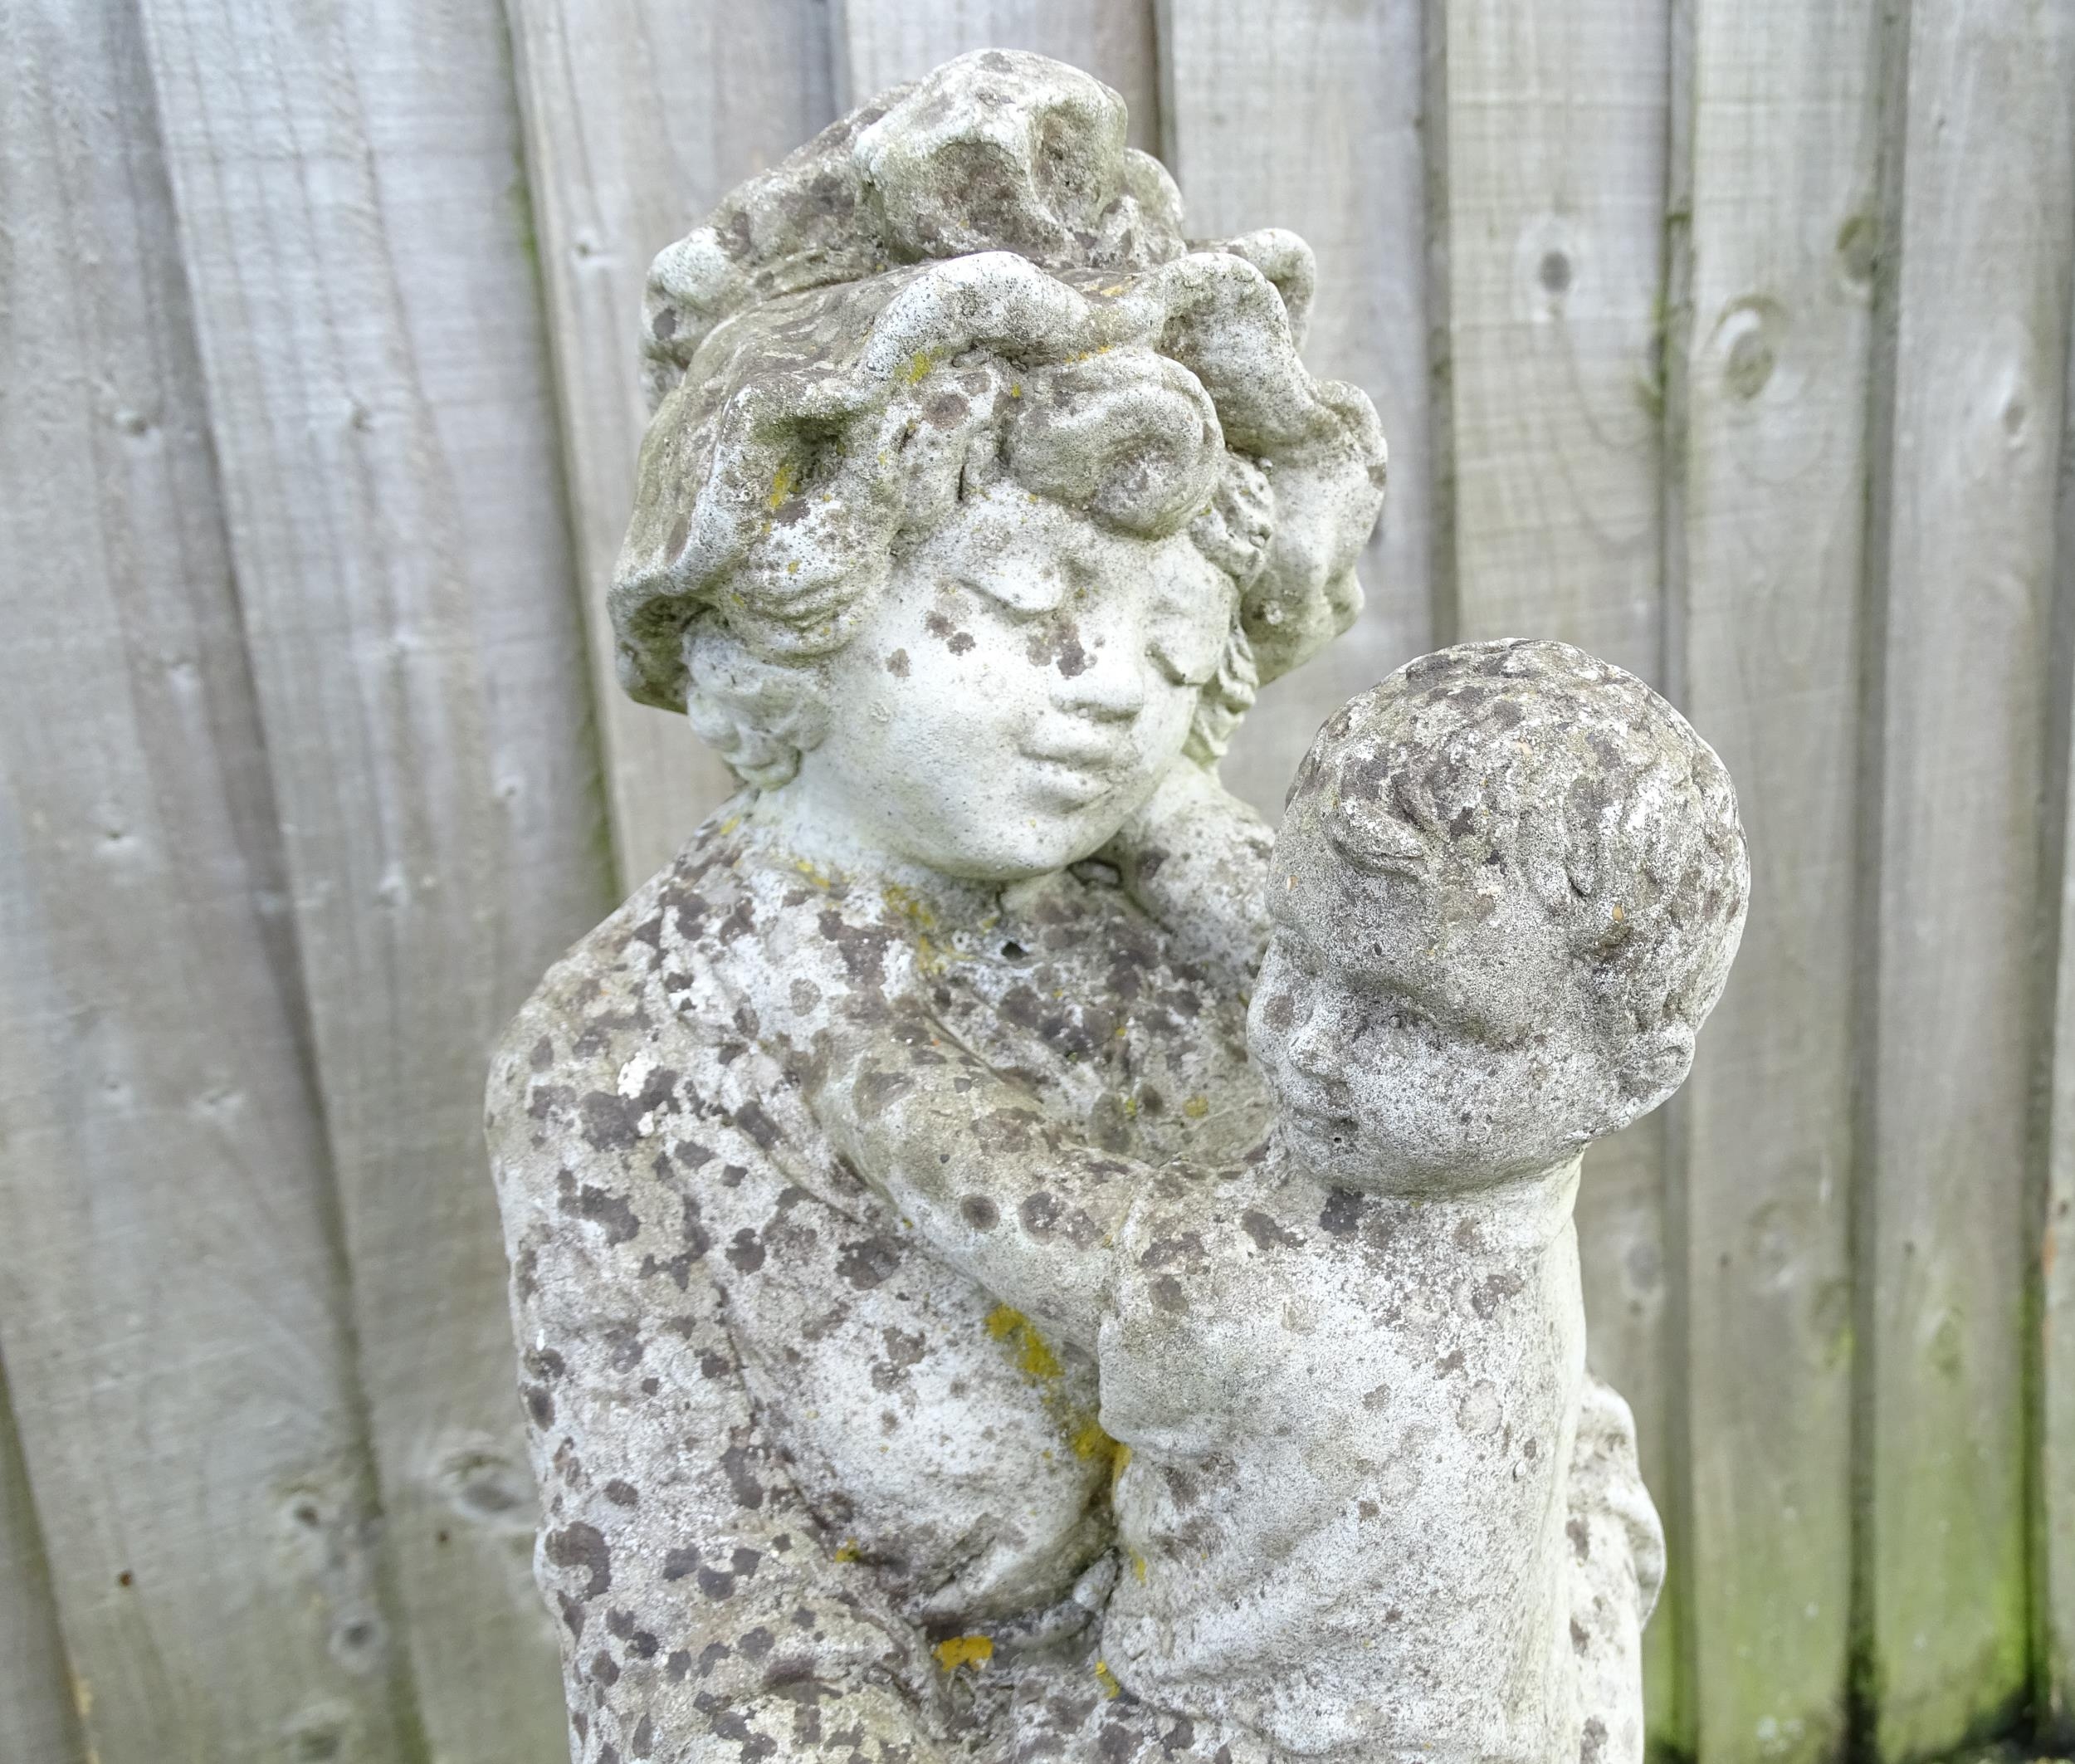 Garden & Architectural : a reconstituted stone statue formed as a mother and child, standing - Image 5 of 6